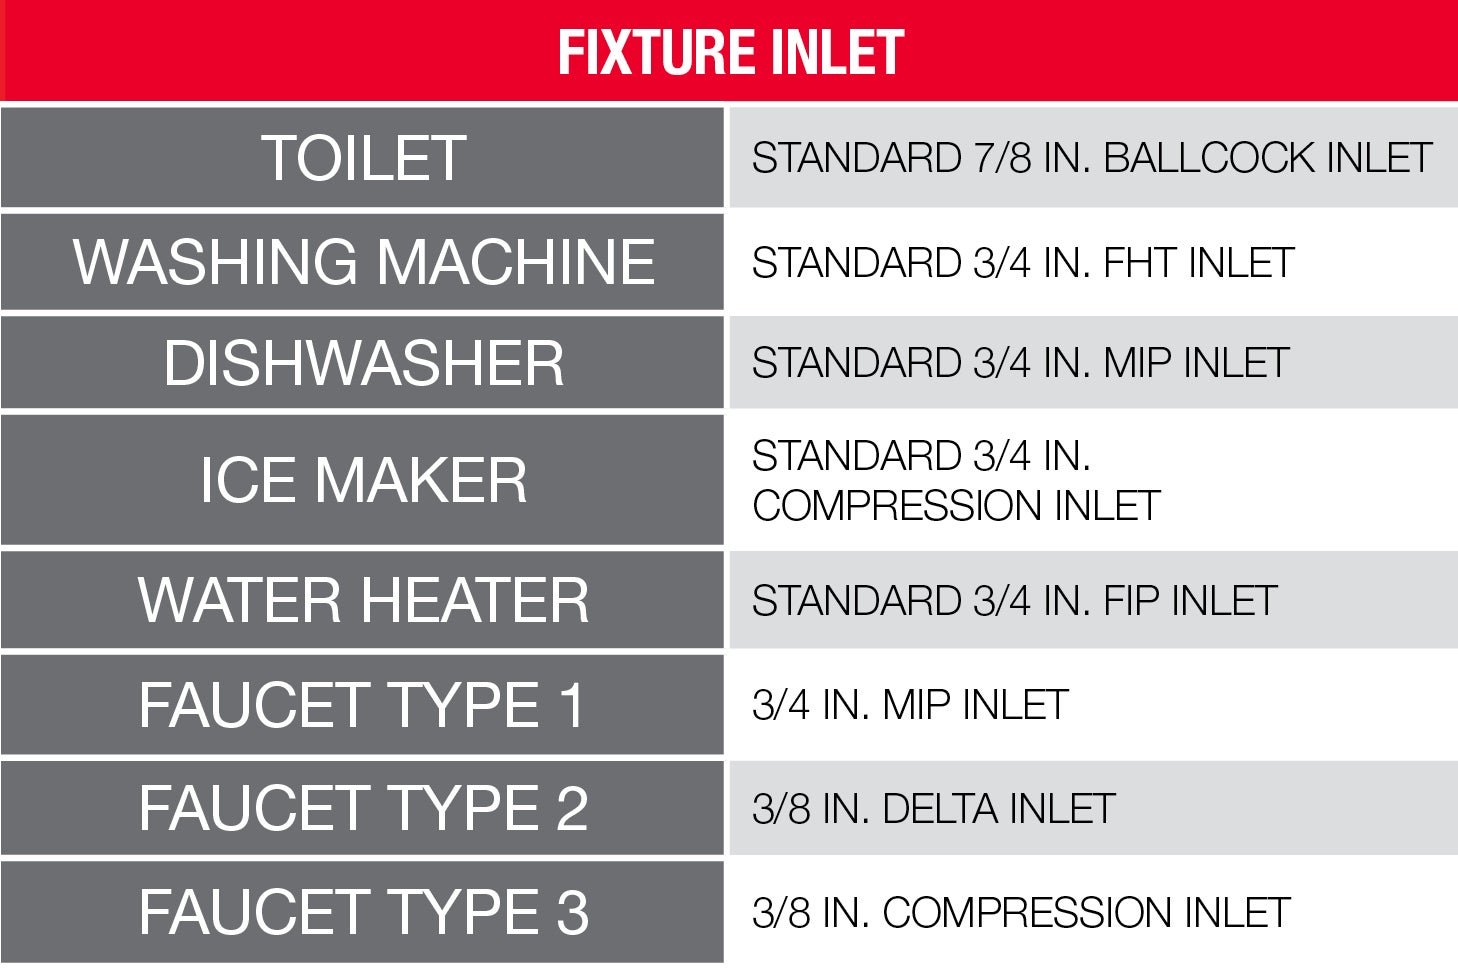 Fixture Inlet Standard Sizing